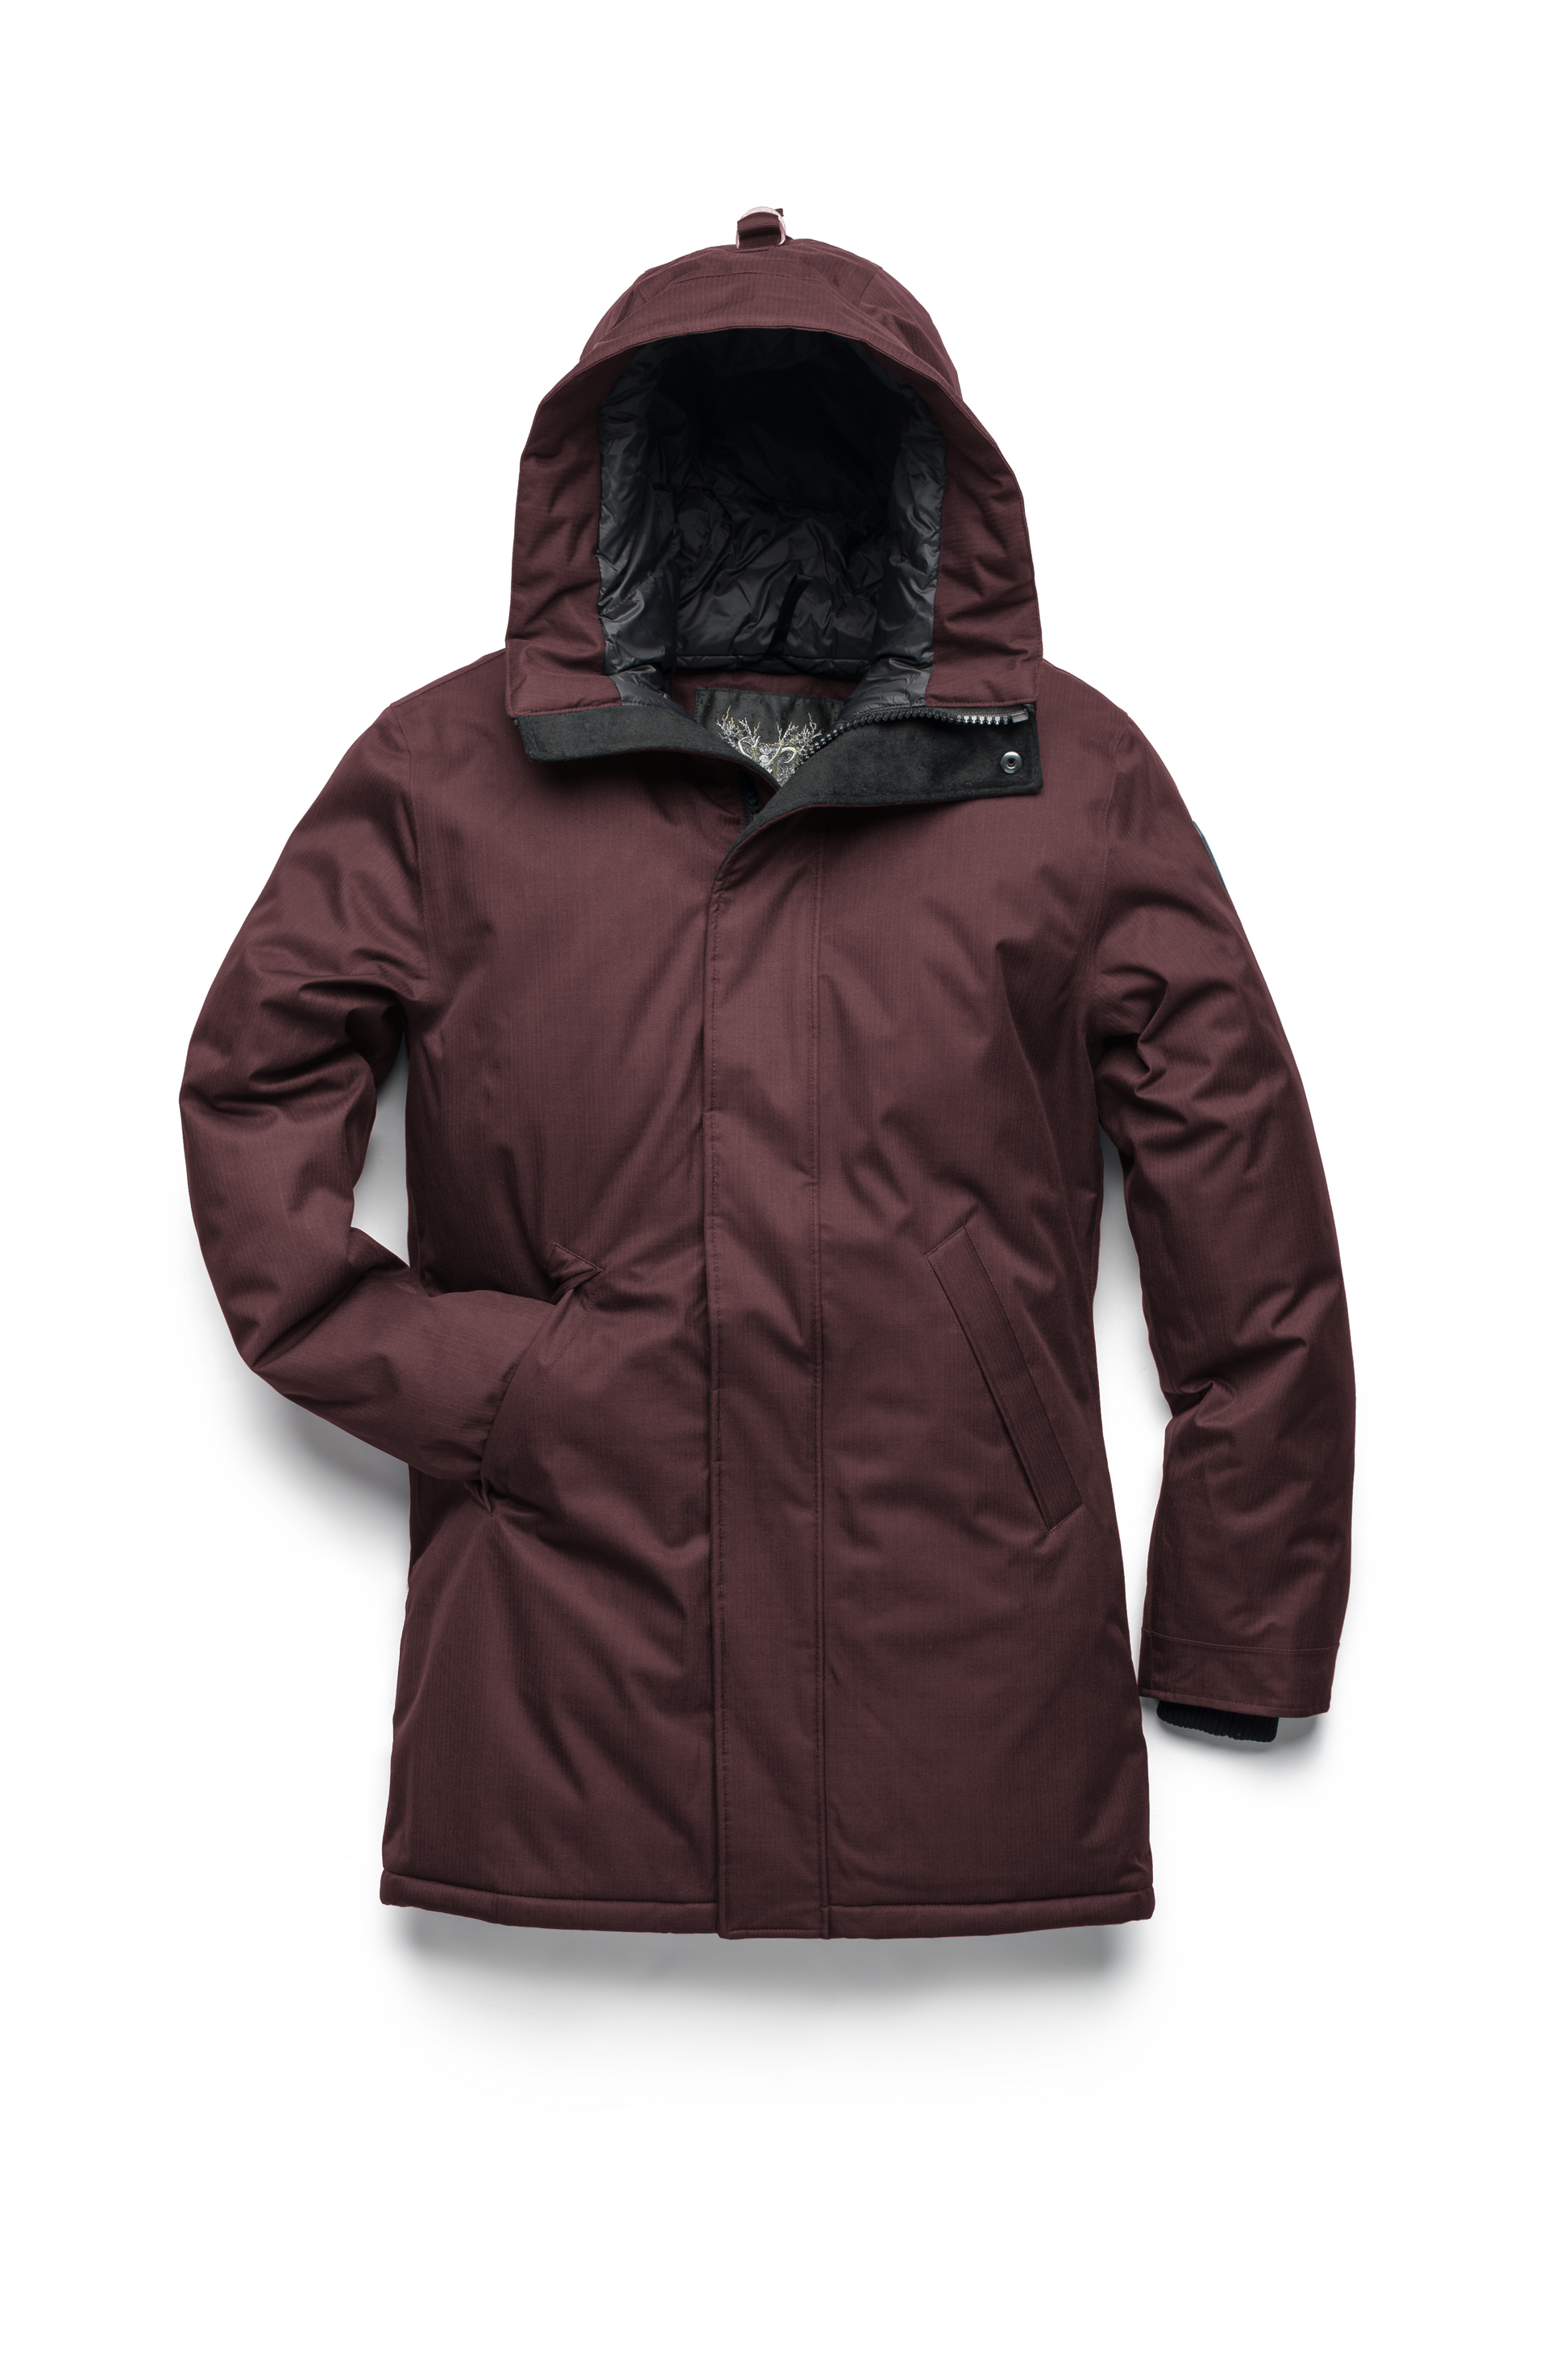 Pierre Men's Jacket in thigh length, Canadian white duck down insulation, non-removable down-filled hood, angled waist pockets, centre-front zipper with wind flap, and elastic ribbed cuffs, in Merlot